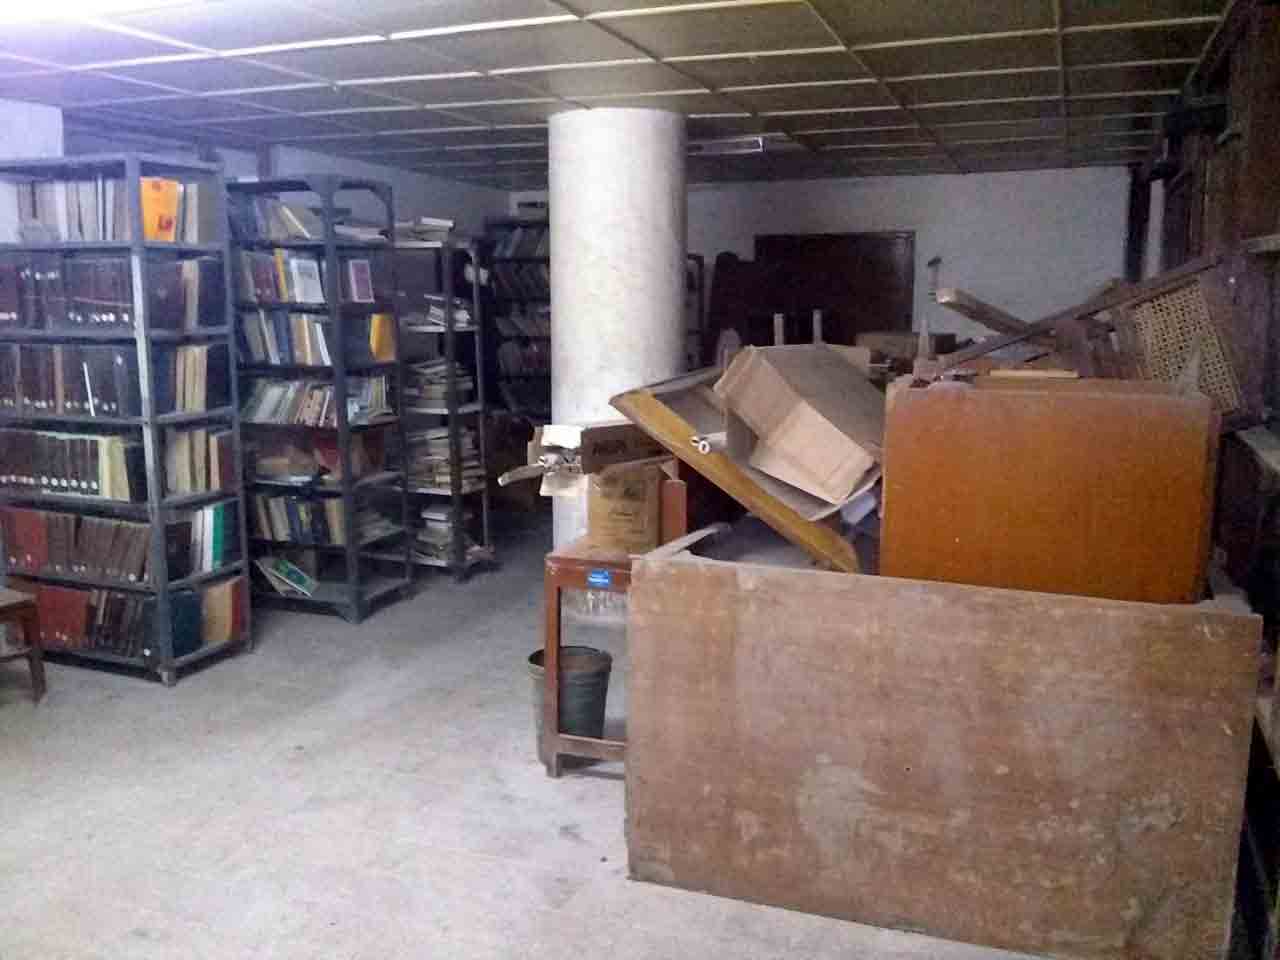 Dilapidated condition of KU library.